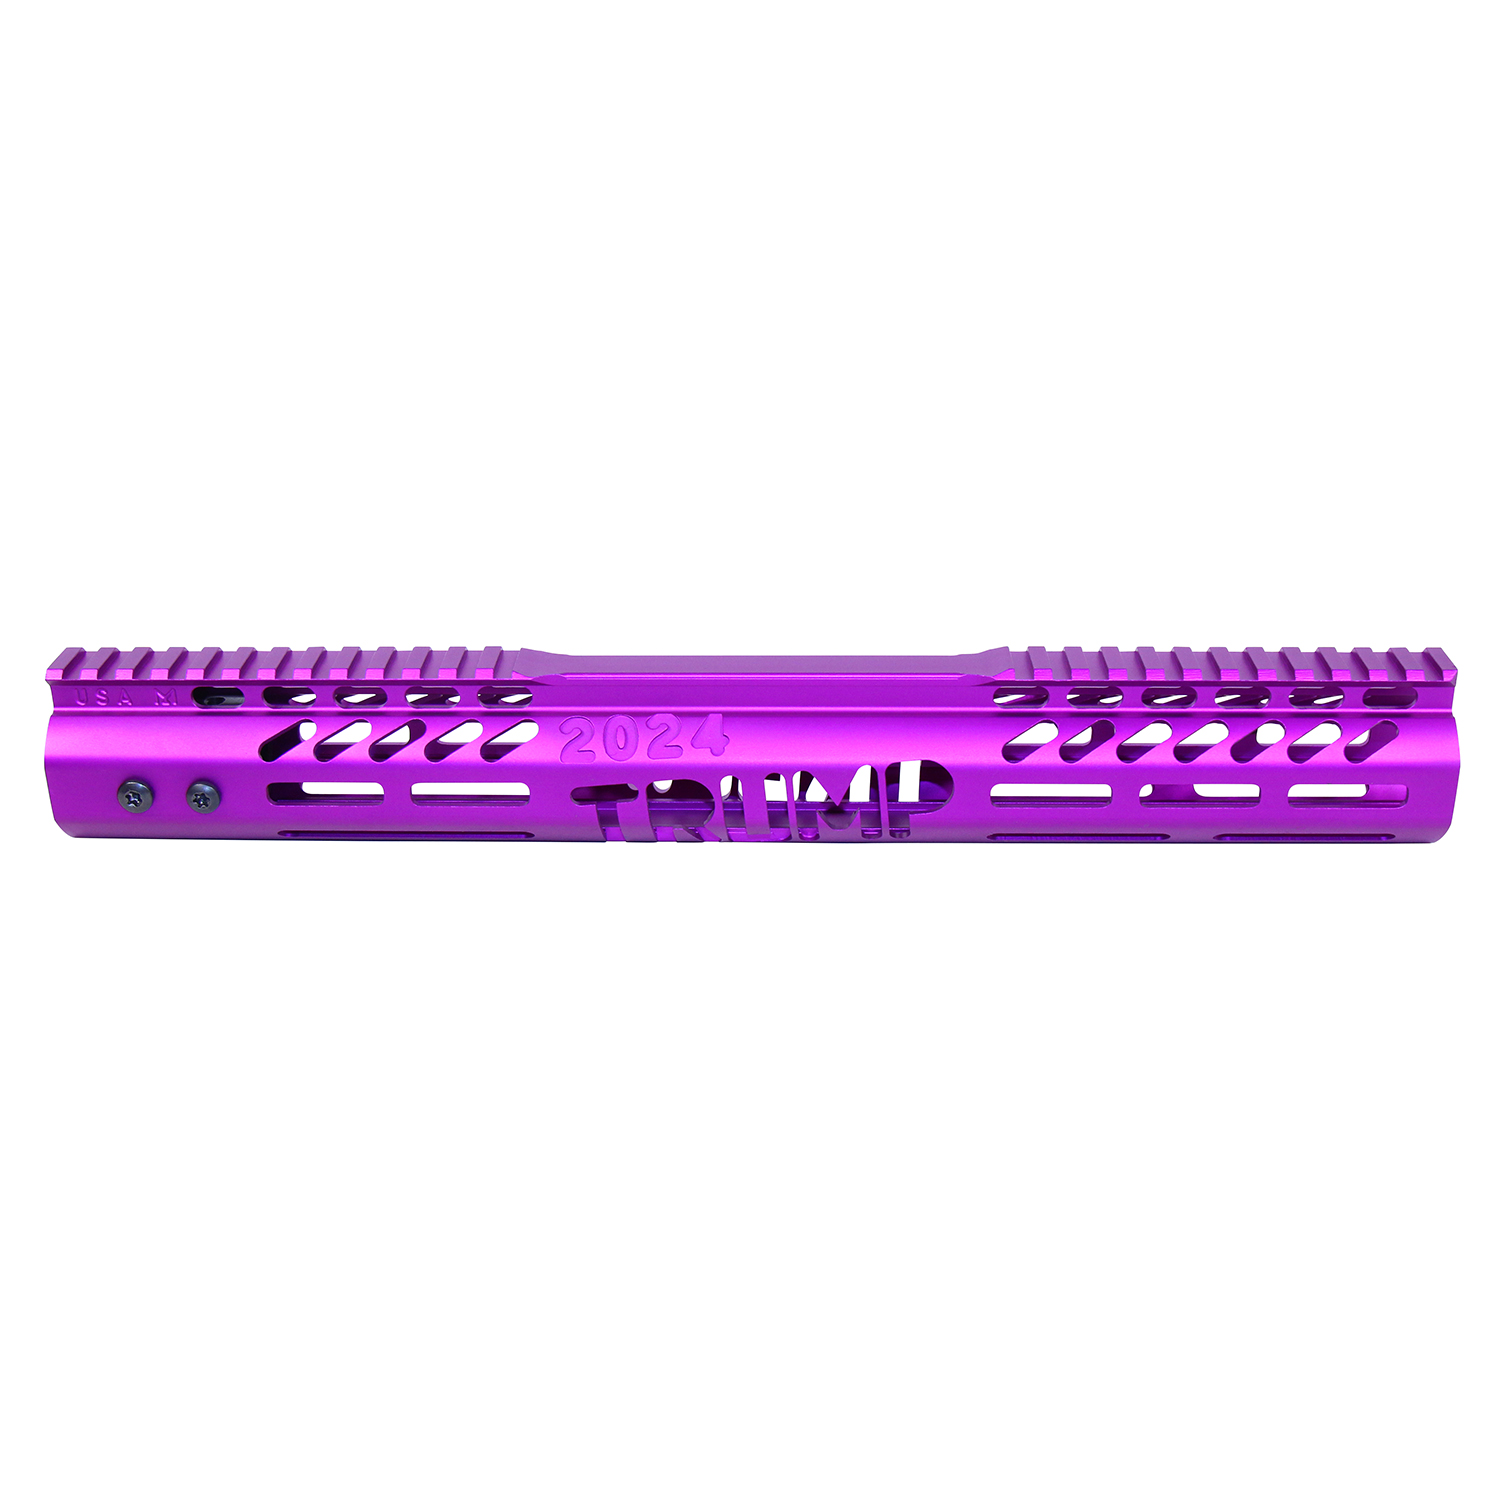 .308 Cal 15" "Trump Series" Limited Edition M-LOK System Free Floating Handguard With Monolithic Top Rail (Anodized Purple)